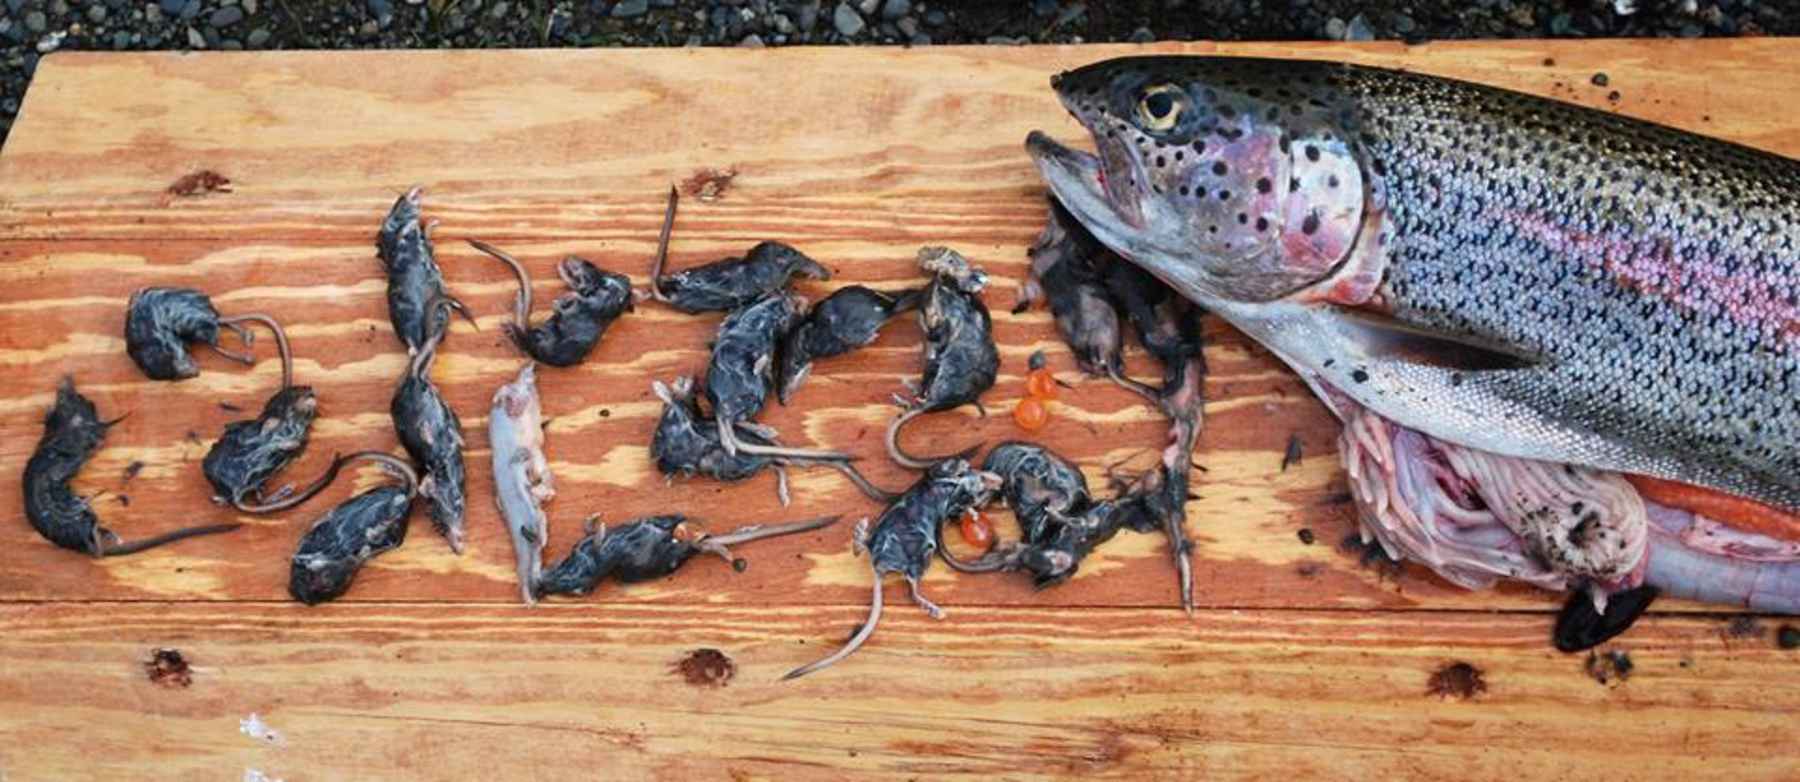 This is Why you Sling Mice for Trout